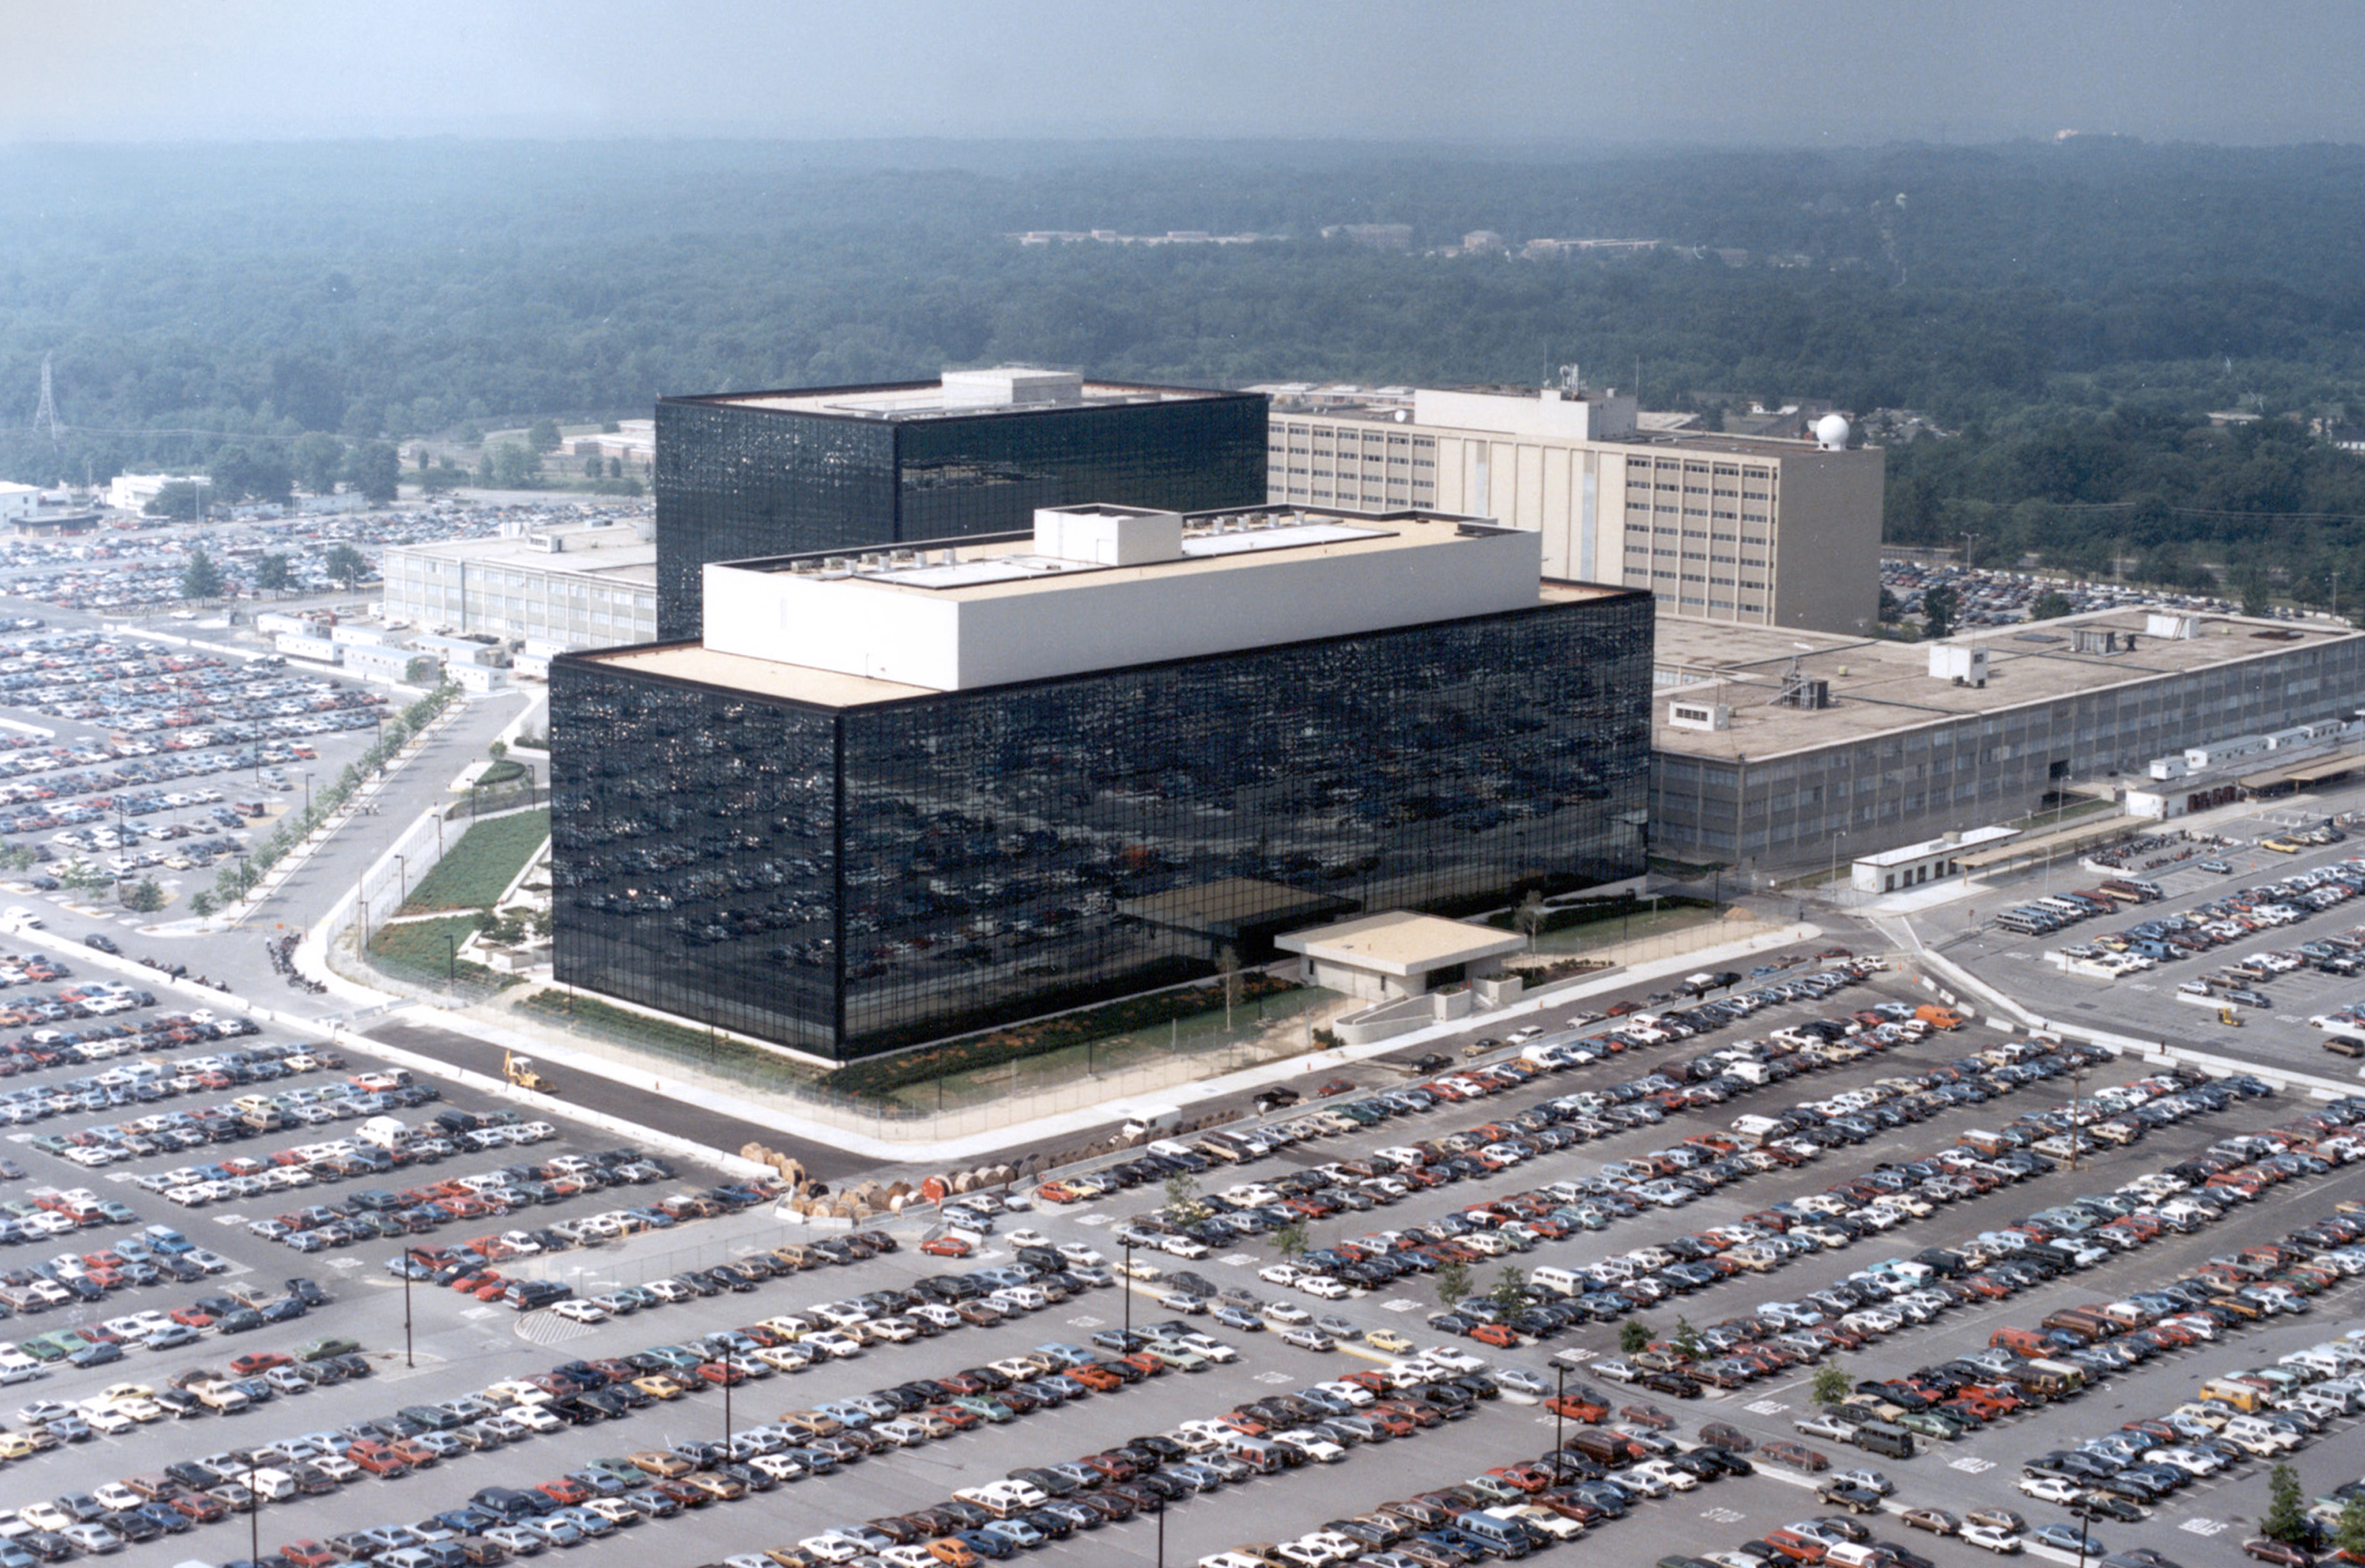 The National Security Agency (NSA) headquarters building in Fort Meade, Md.